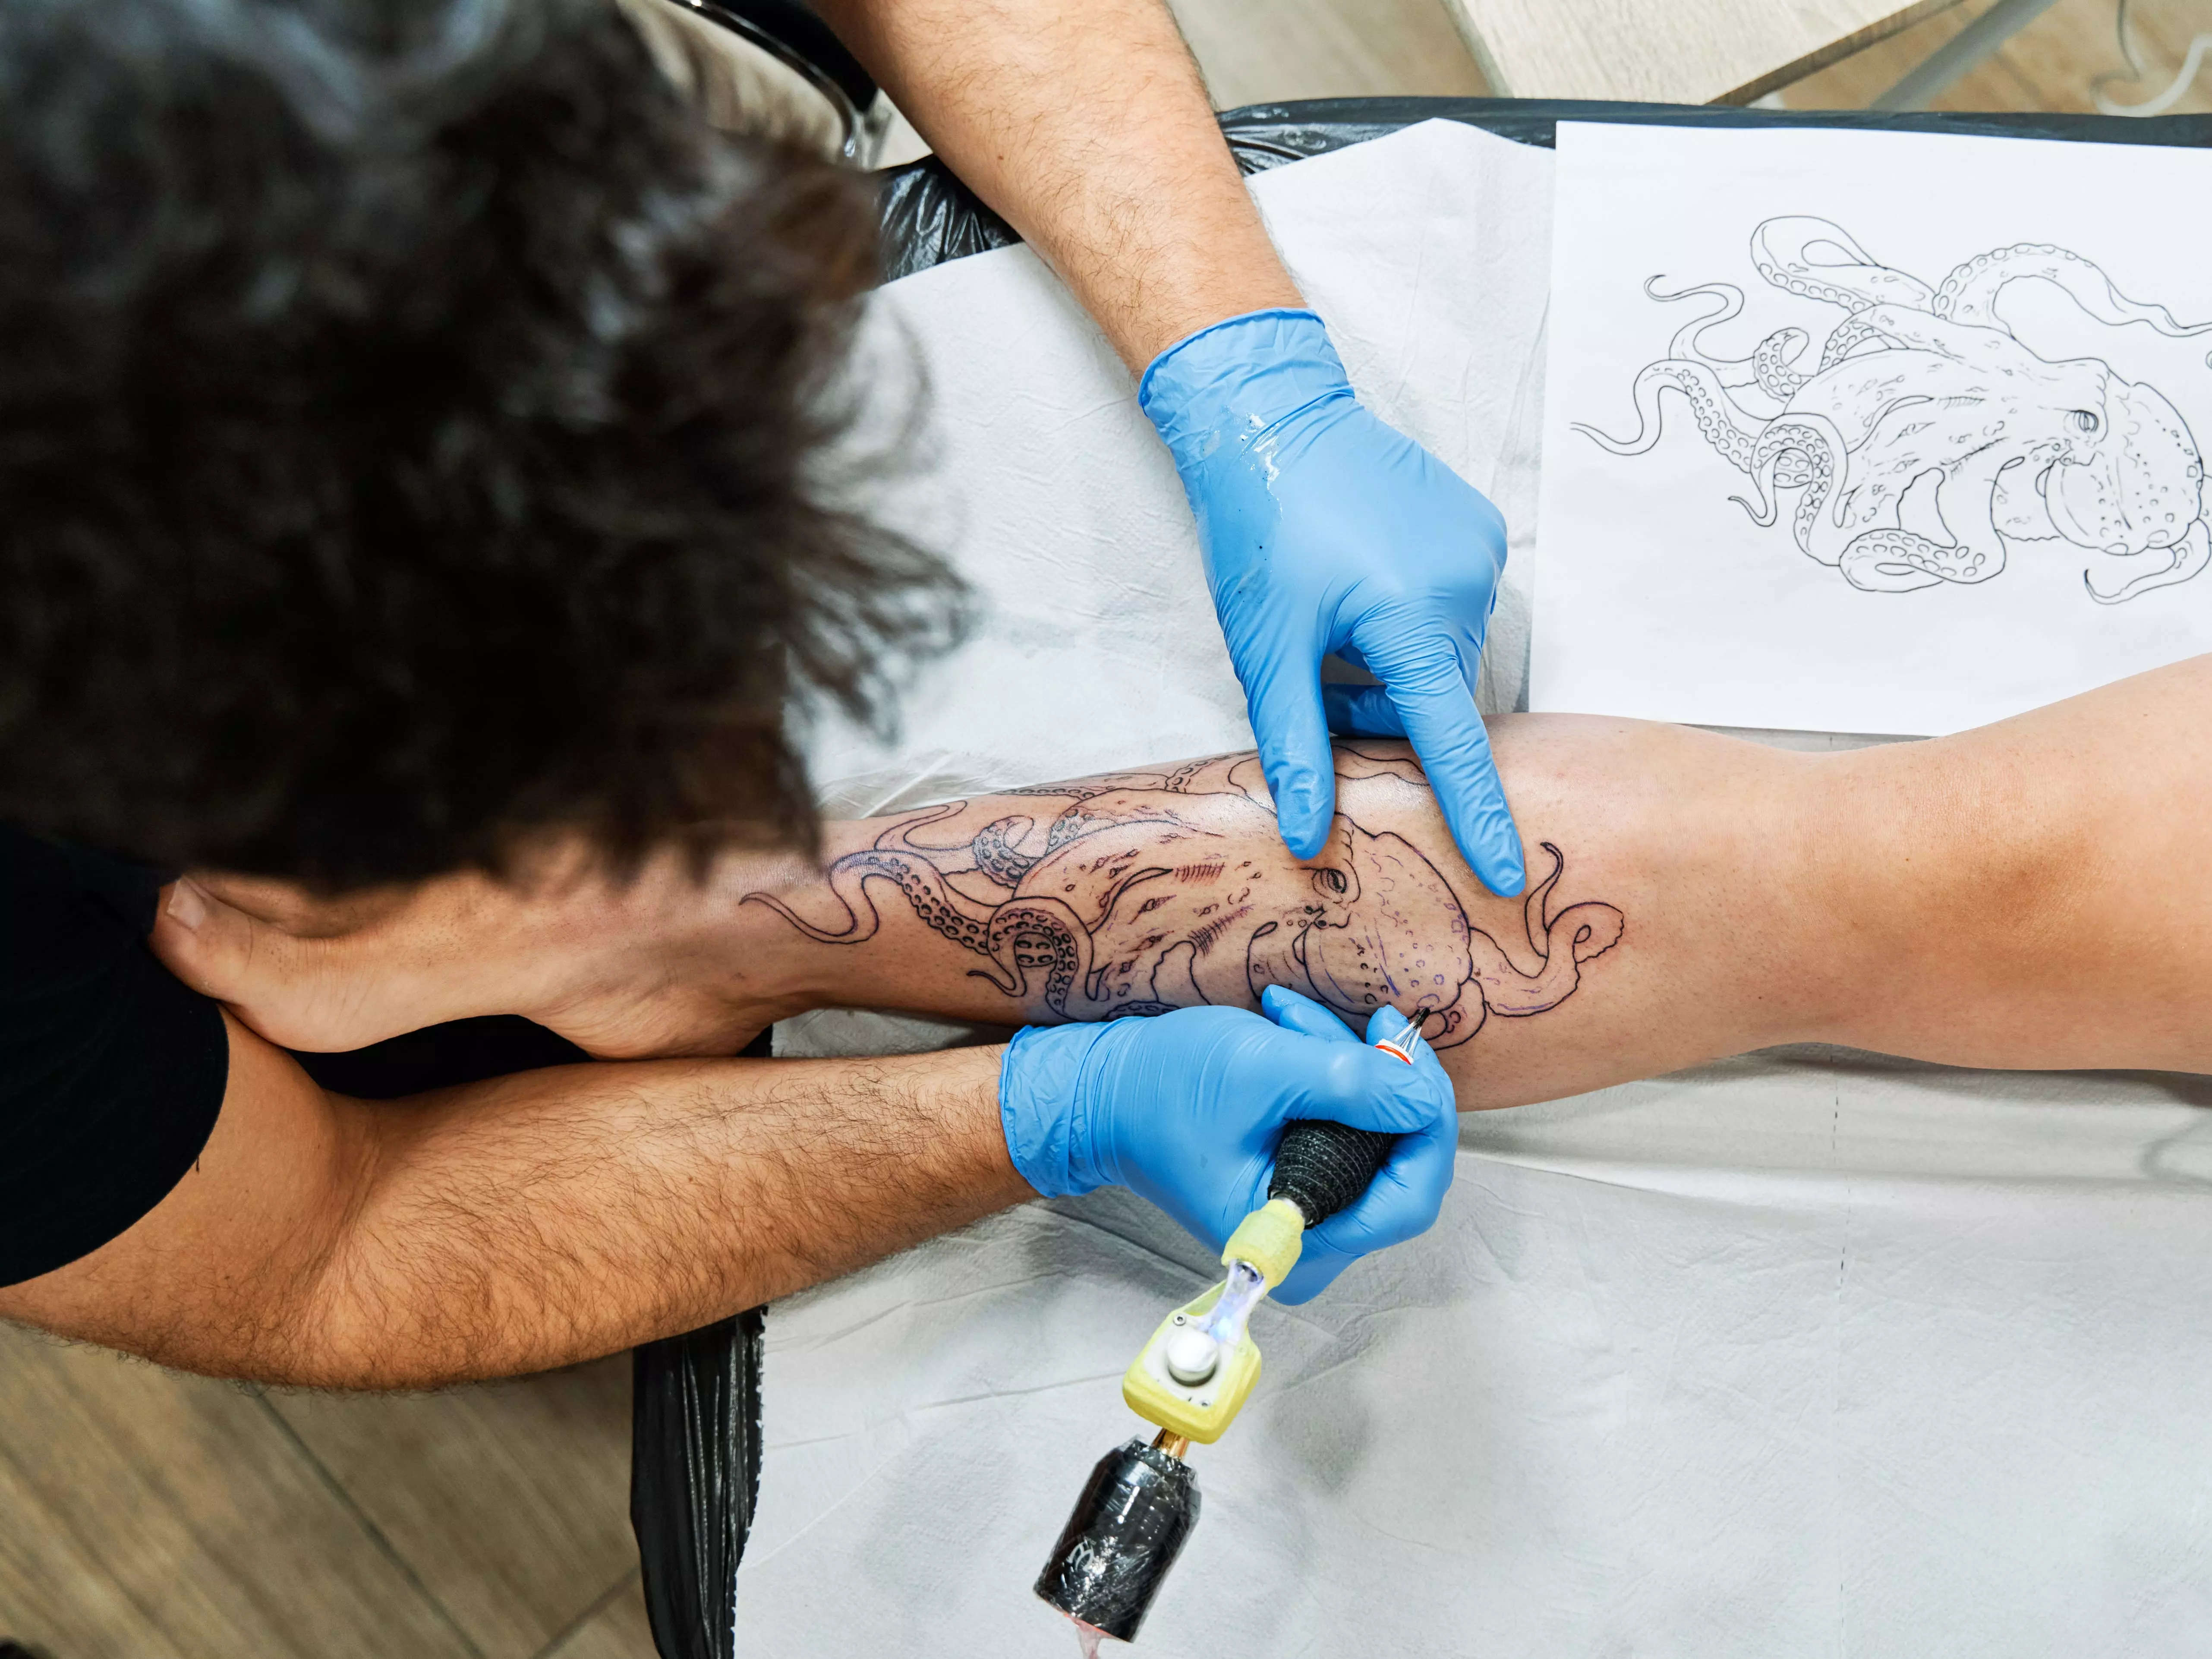 
Tattoo artists share 6 designs everyone will want this year, and 2 that'll be less popular
